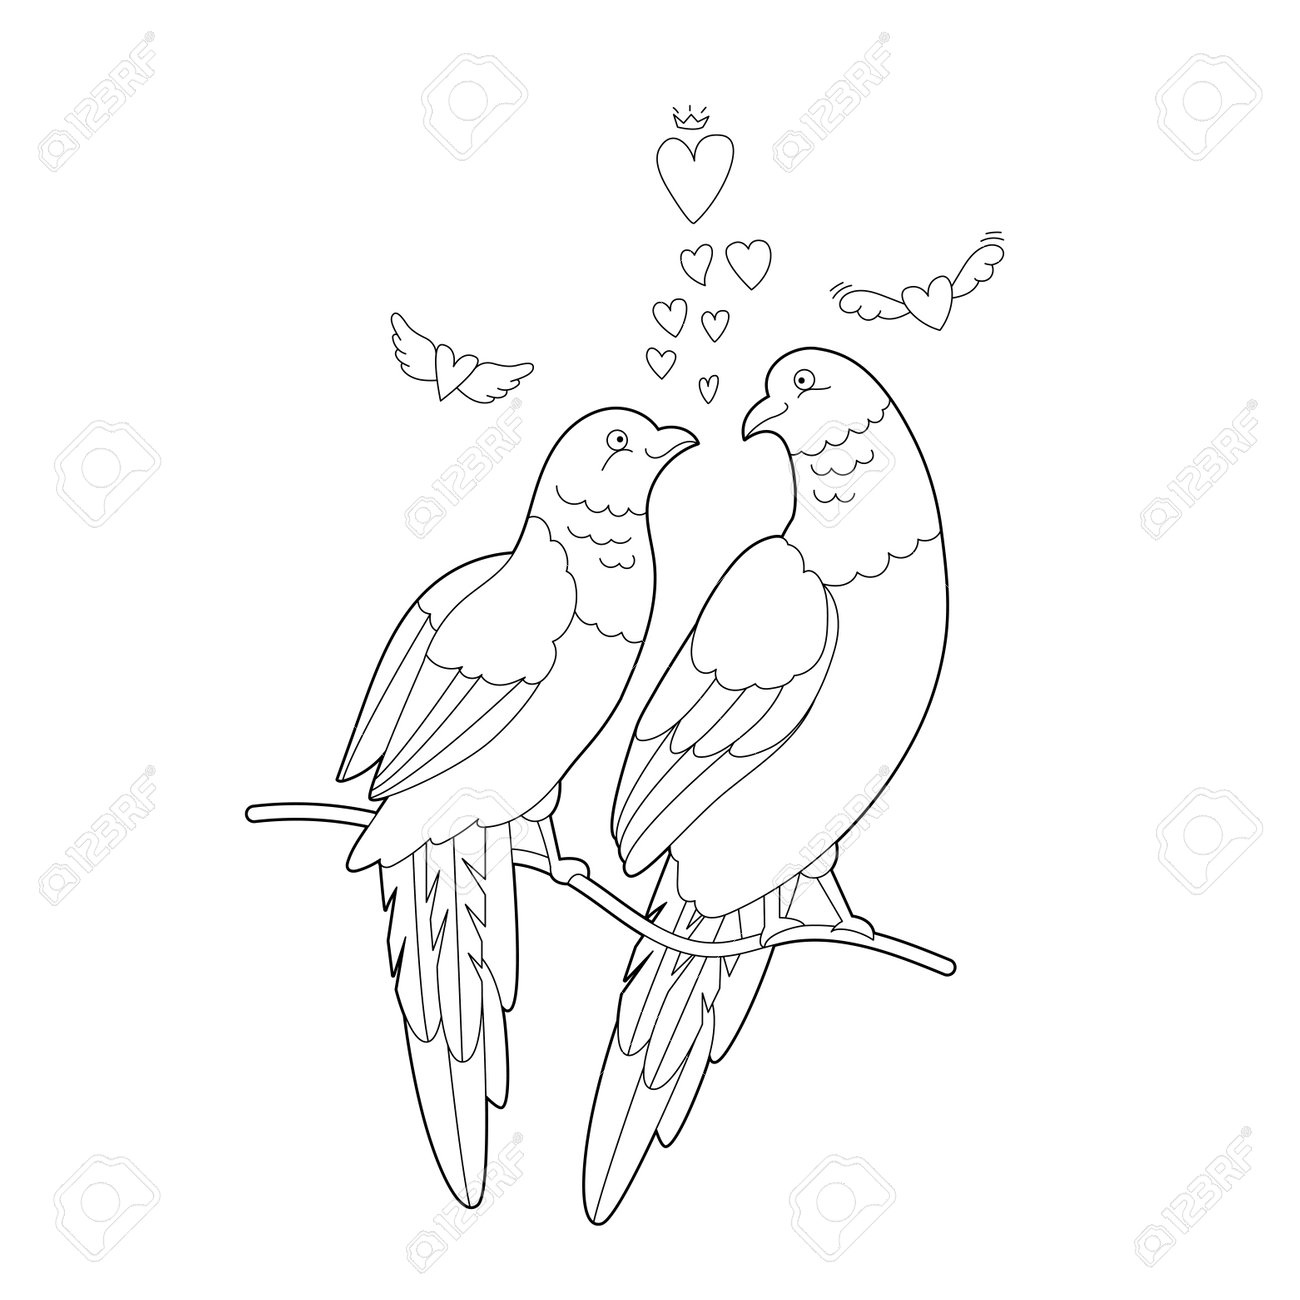 Contour linear illustration for coloring book with two pretty birds beautiful cute couple anti stress picture line art design for adult or kids in zen